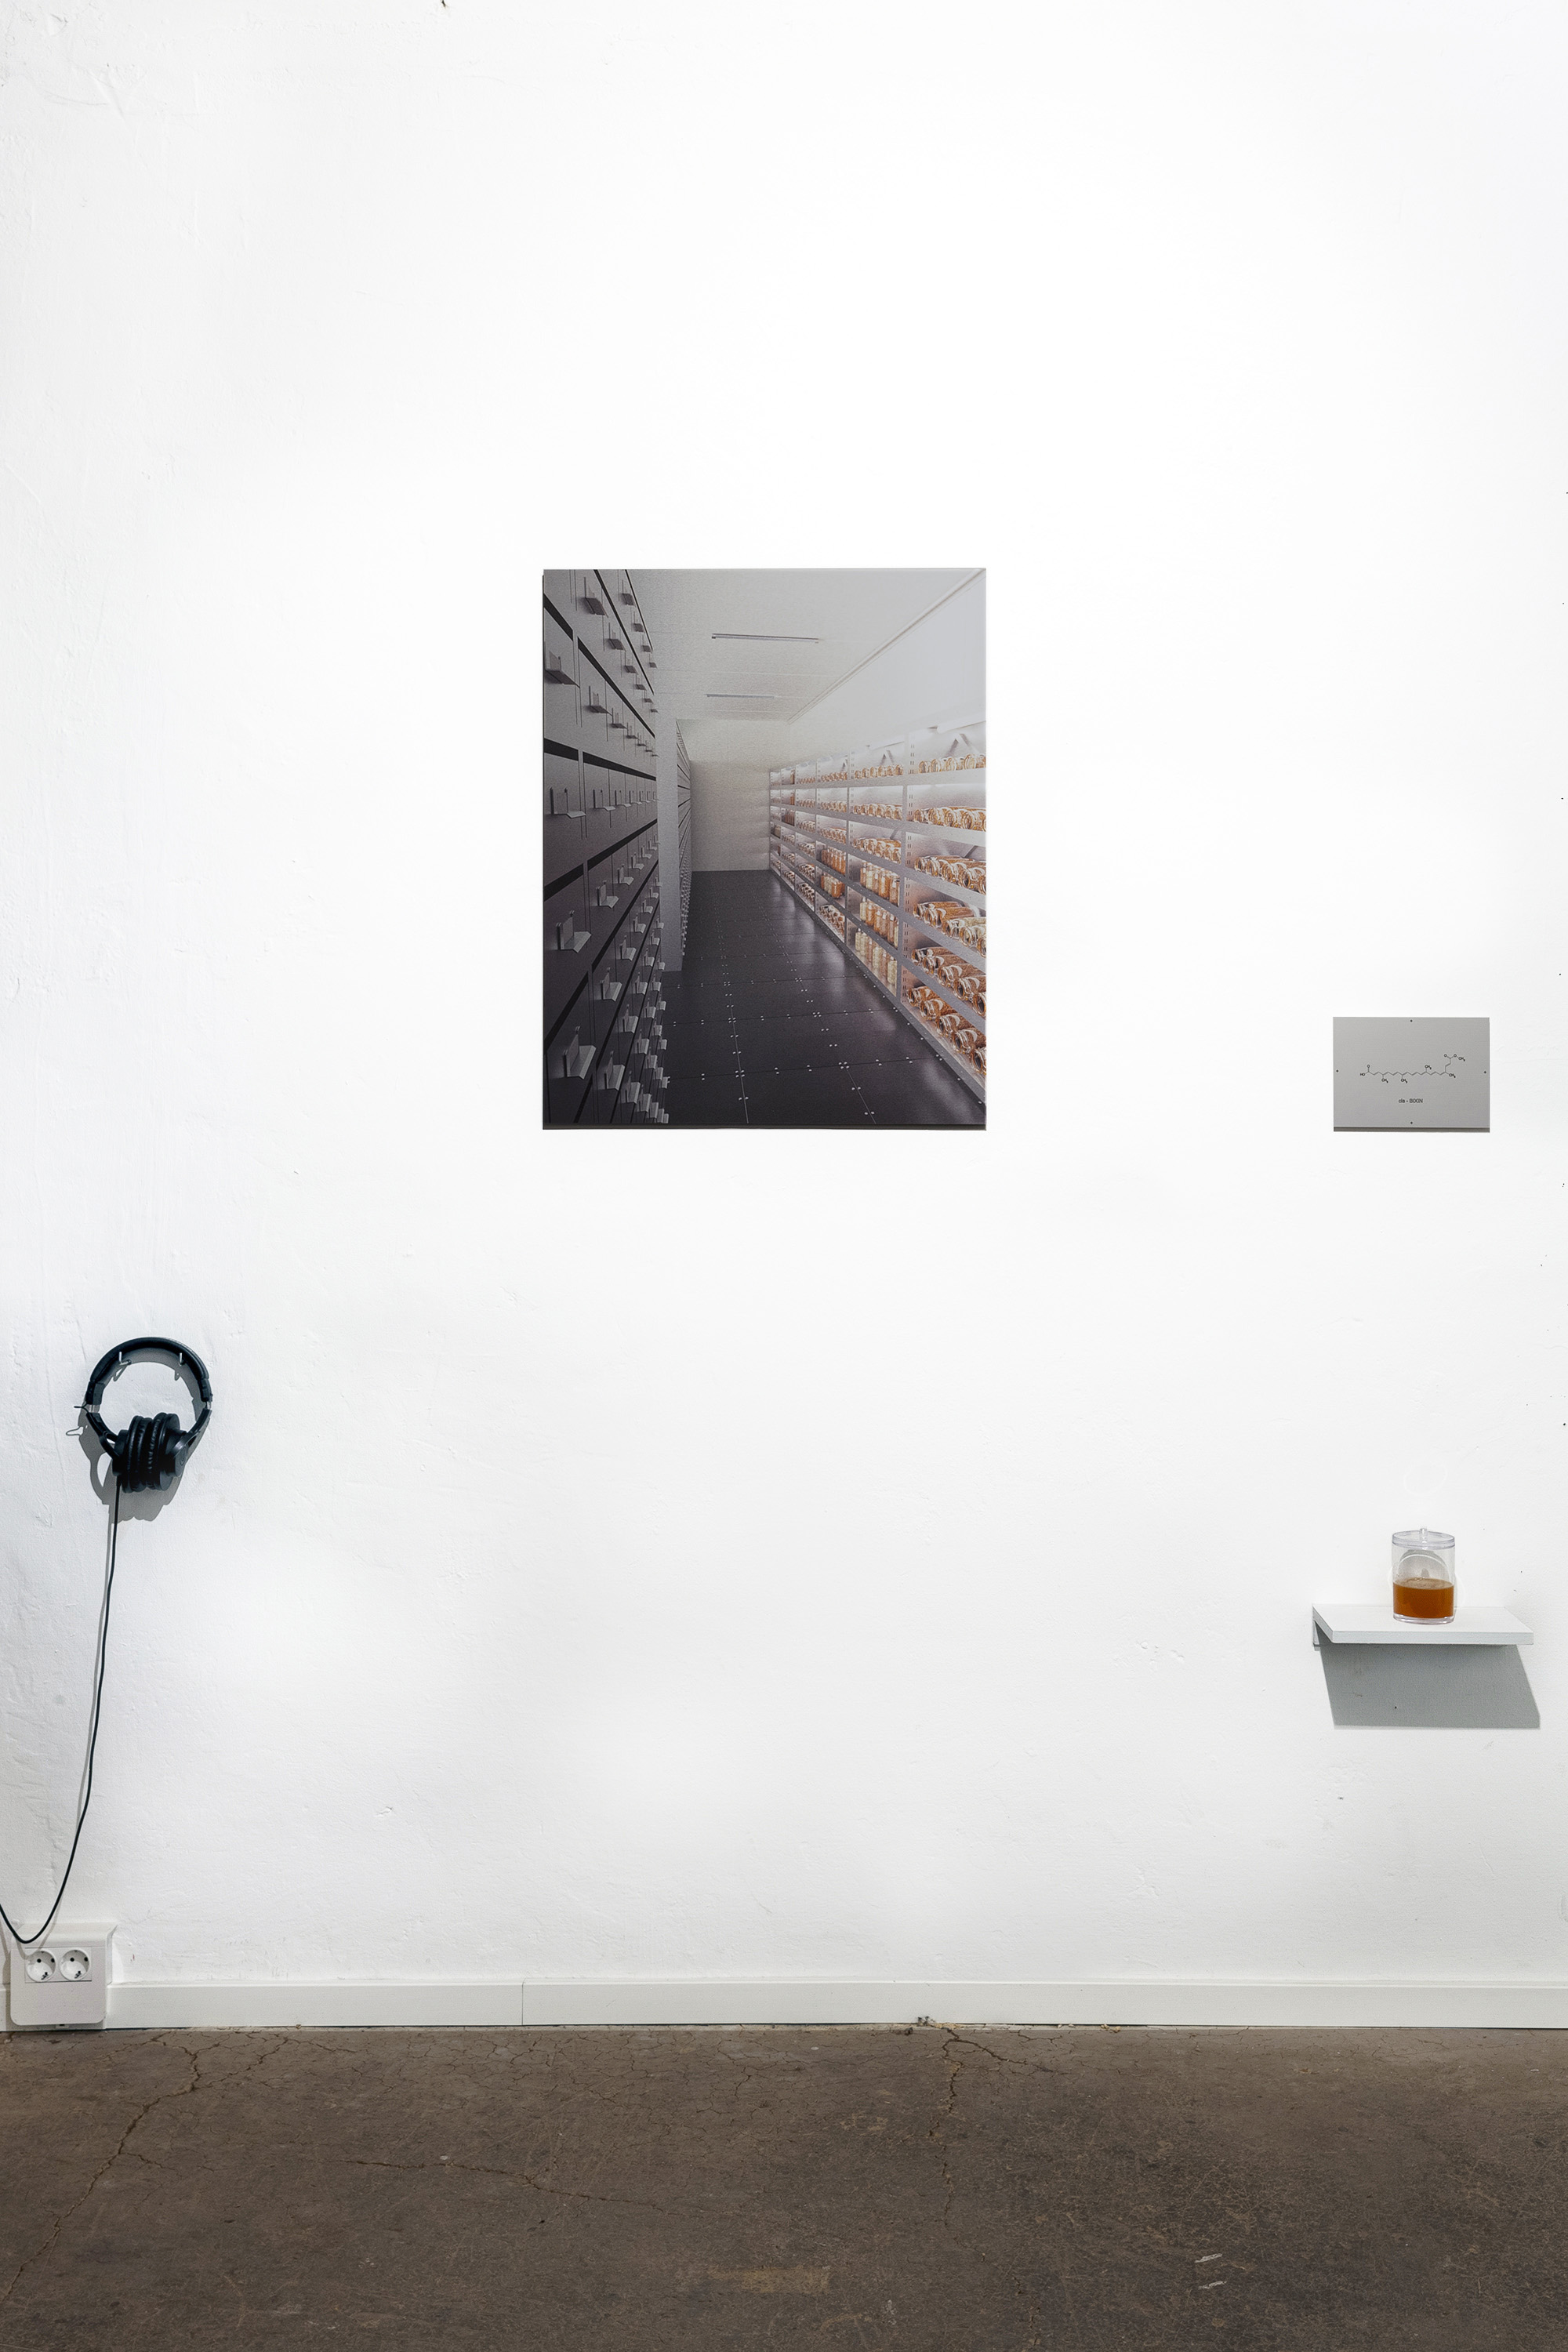 An image of an interior of a seed bank printed on an aluminum panel is mounted to a white gallery wall. On the left hand side of the panel there are a pair of headphones mounted to the wall and on the right hand side there is a small jar filled with an orange liquid resting on a small shelf.